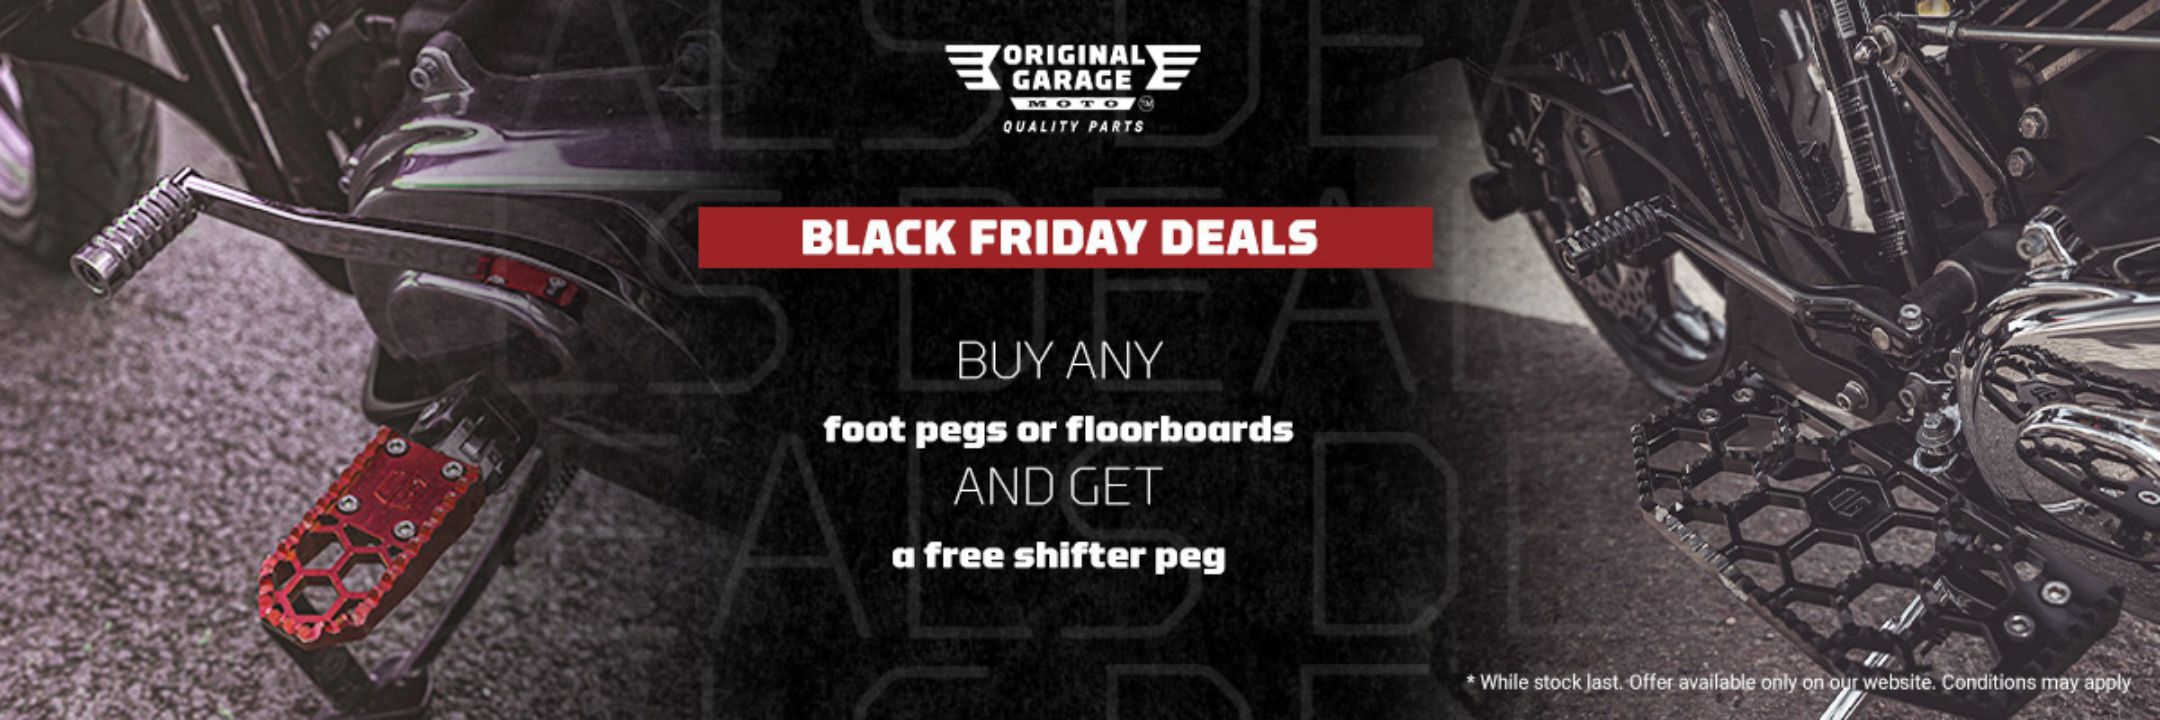 Get a FREE Shifter with any Foot Pegs